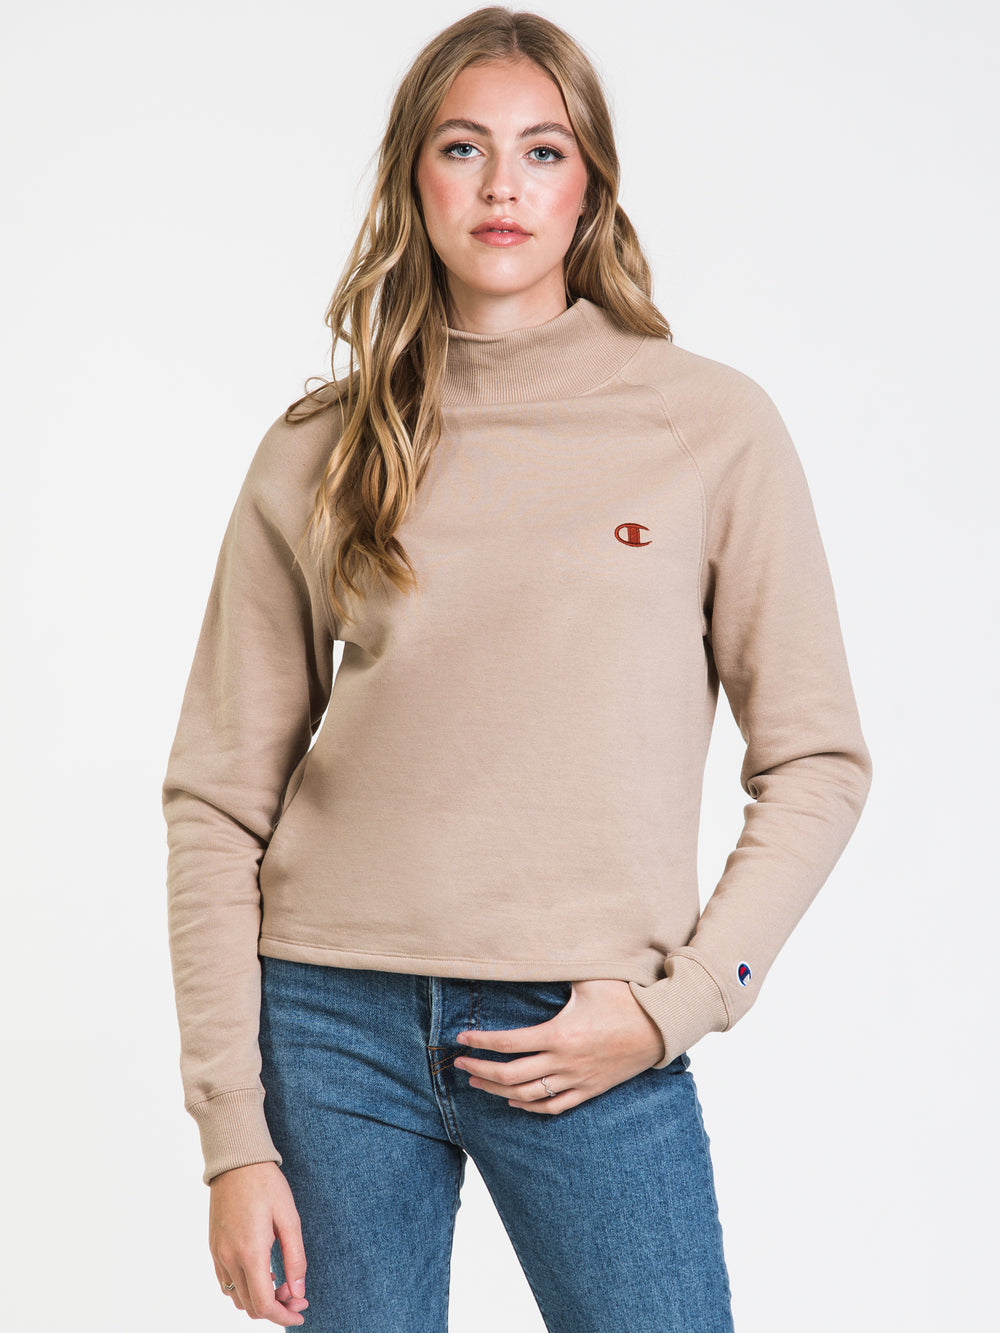 CHAMPION POWERBLEND 'C' MOCK NECK - CLEARANCE